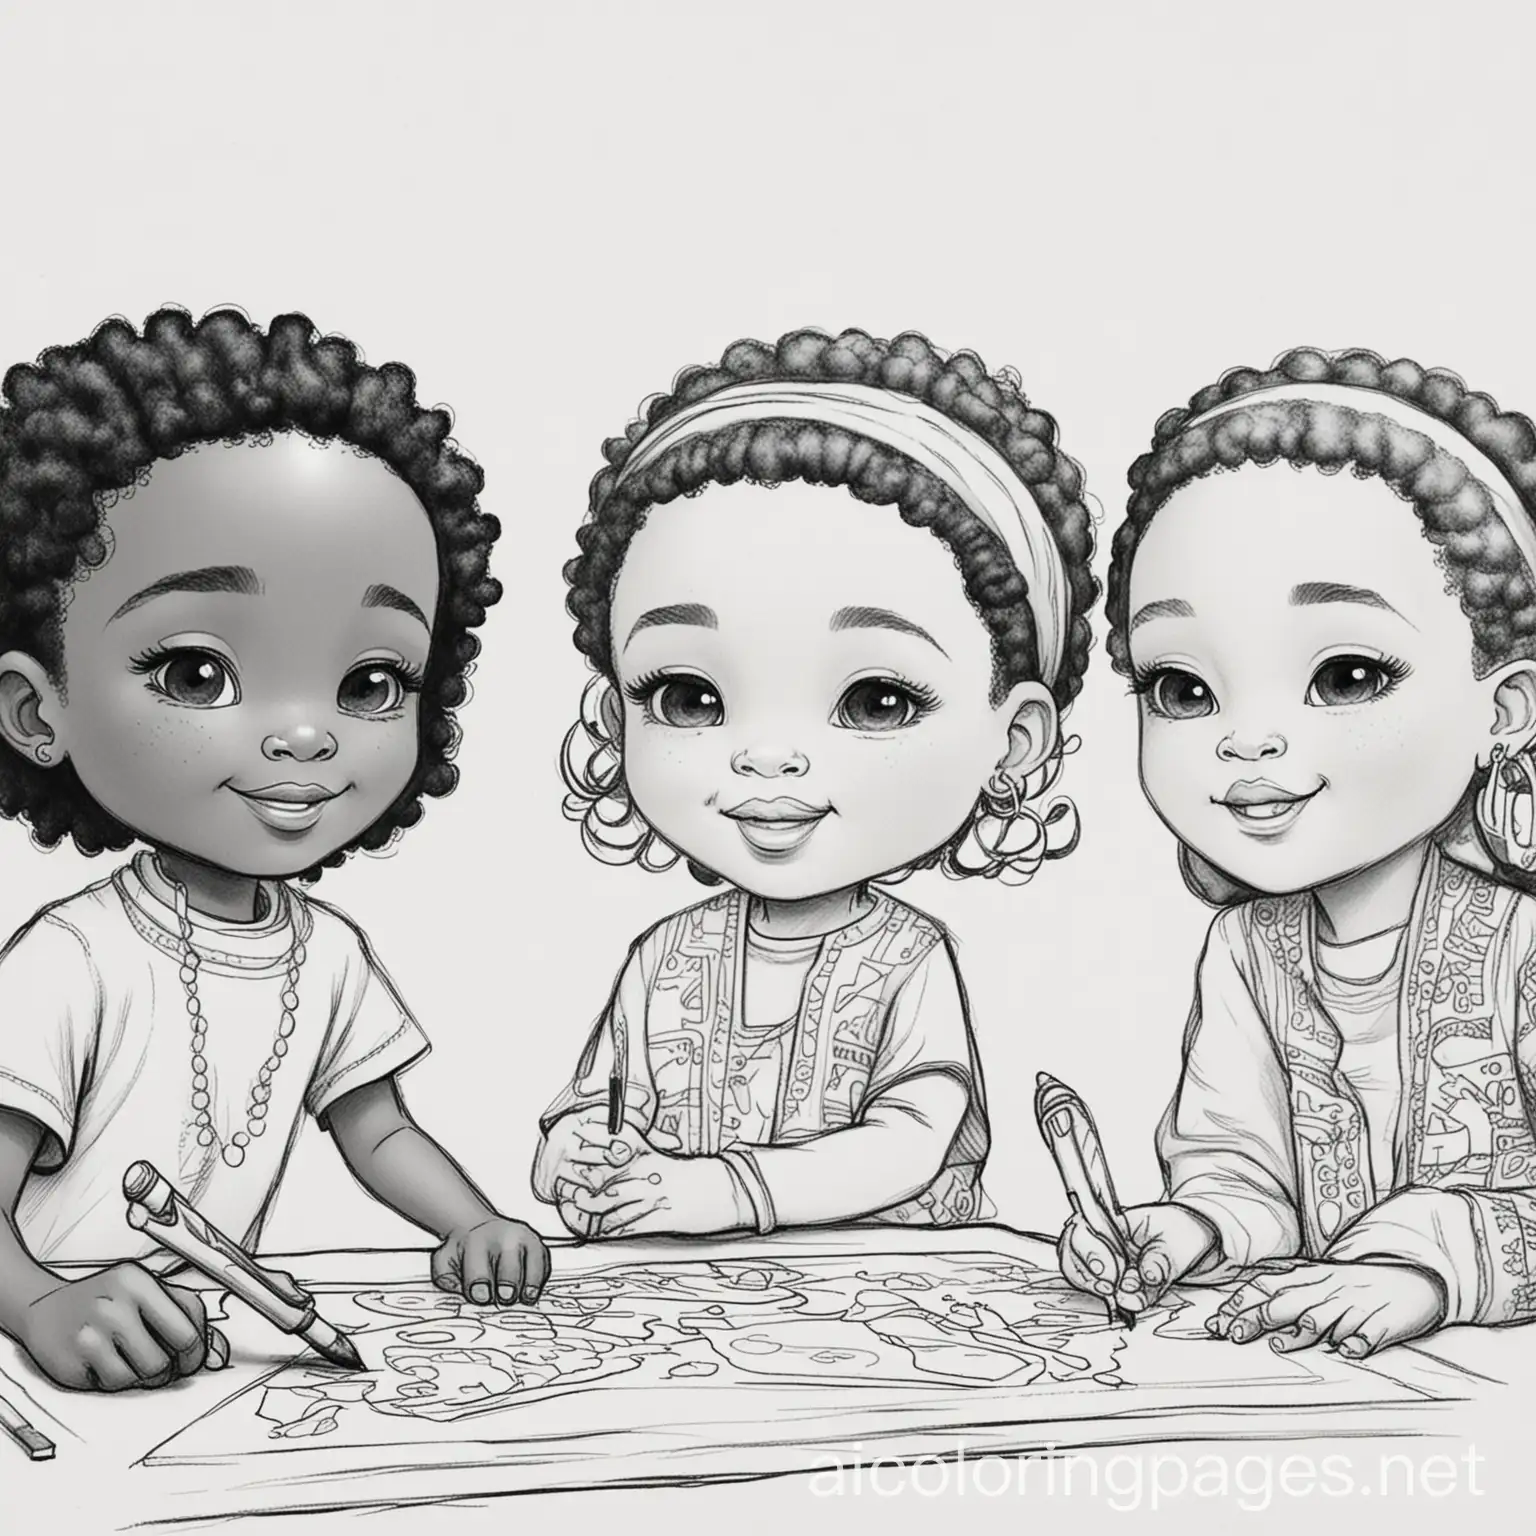 african america kids playing, Coloring Page, black and white, line art, white background, Simplicity, Ample White Space. The background of the coloring page is plain white to make it easy for young children to color within the lines. The outlines of all the subjects are easy to distinguish, making it simple for kids to color without too much difficulty